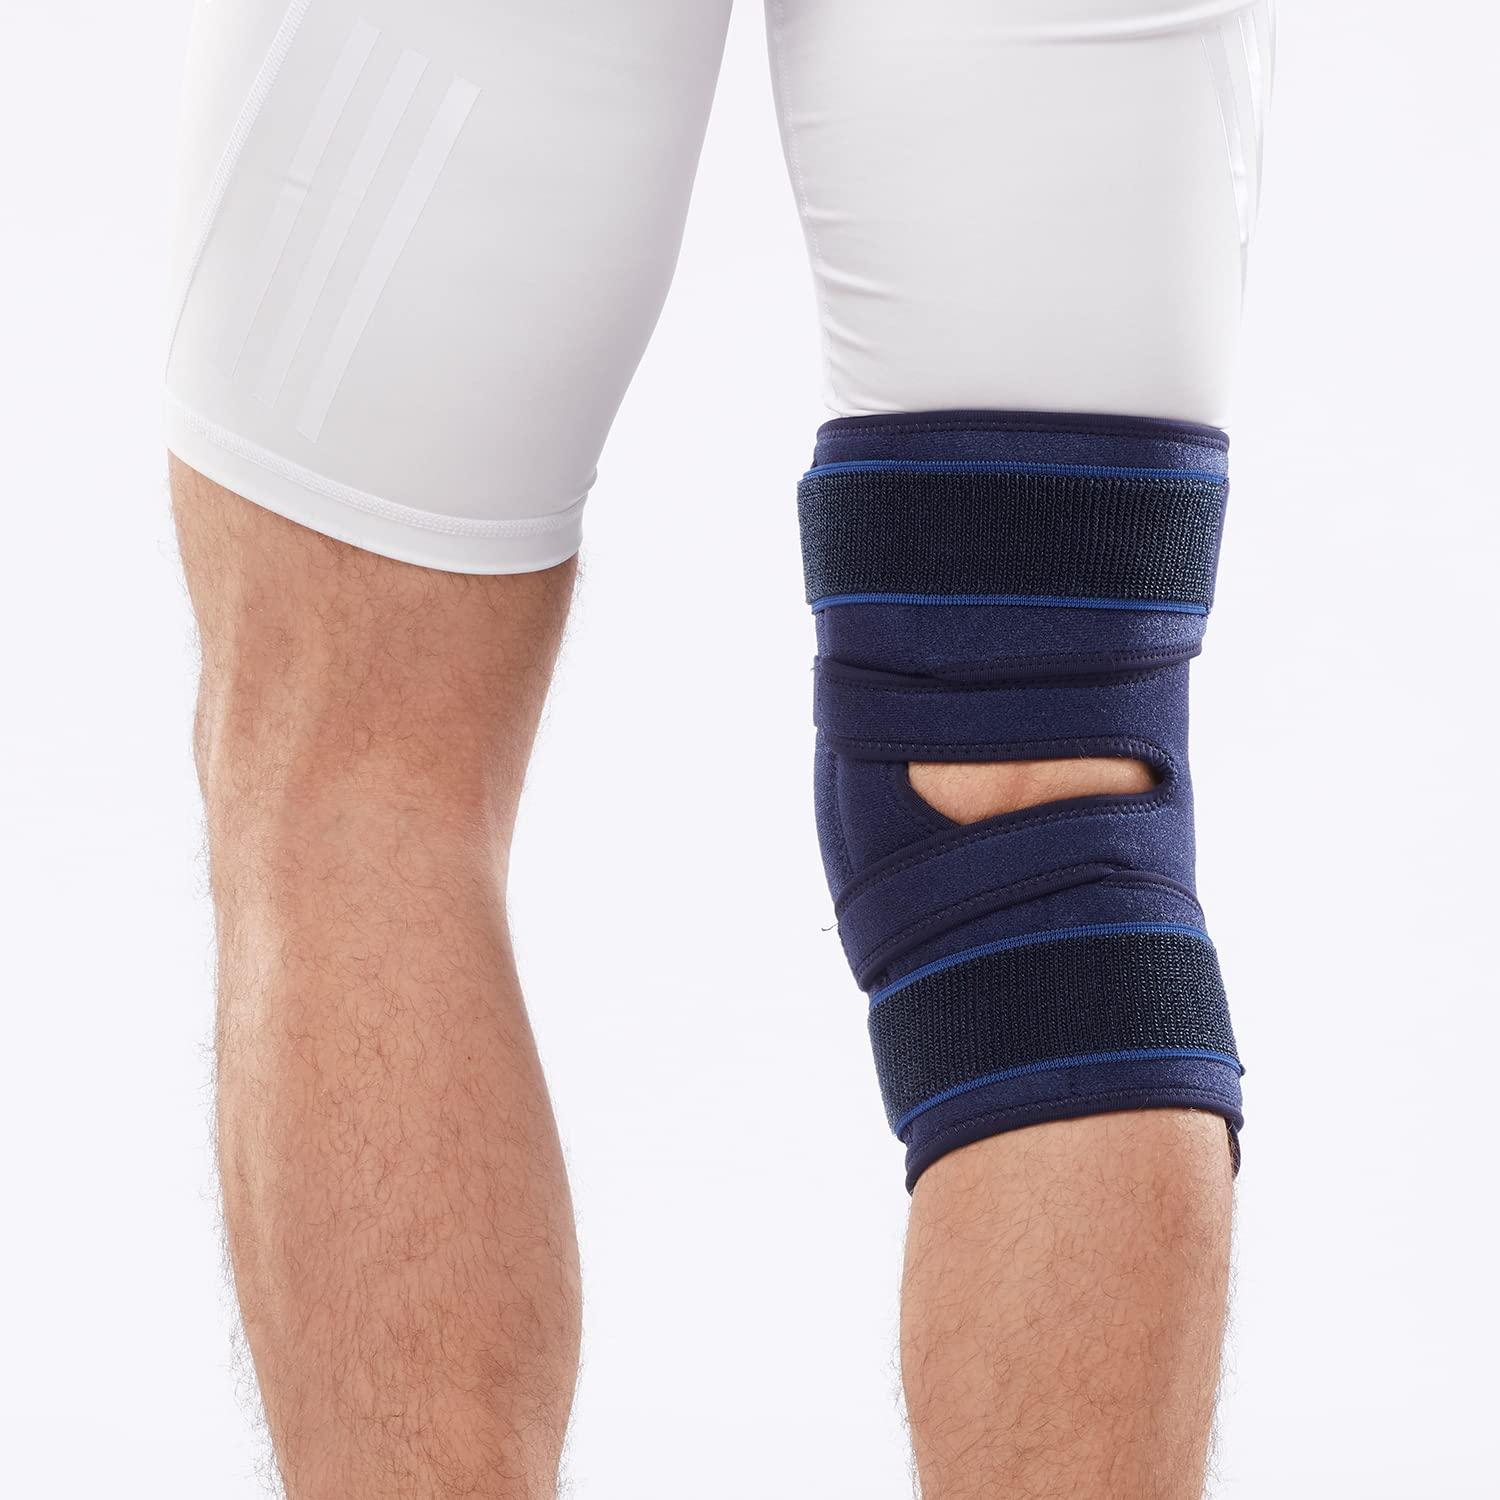 Comforband Adjustable Hinged Knee Brace with Dual Side Hinges Open